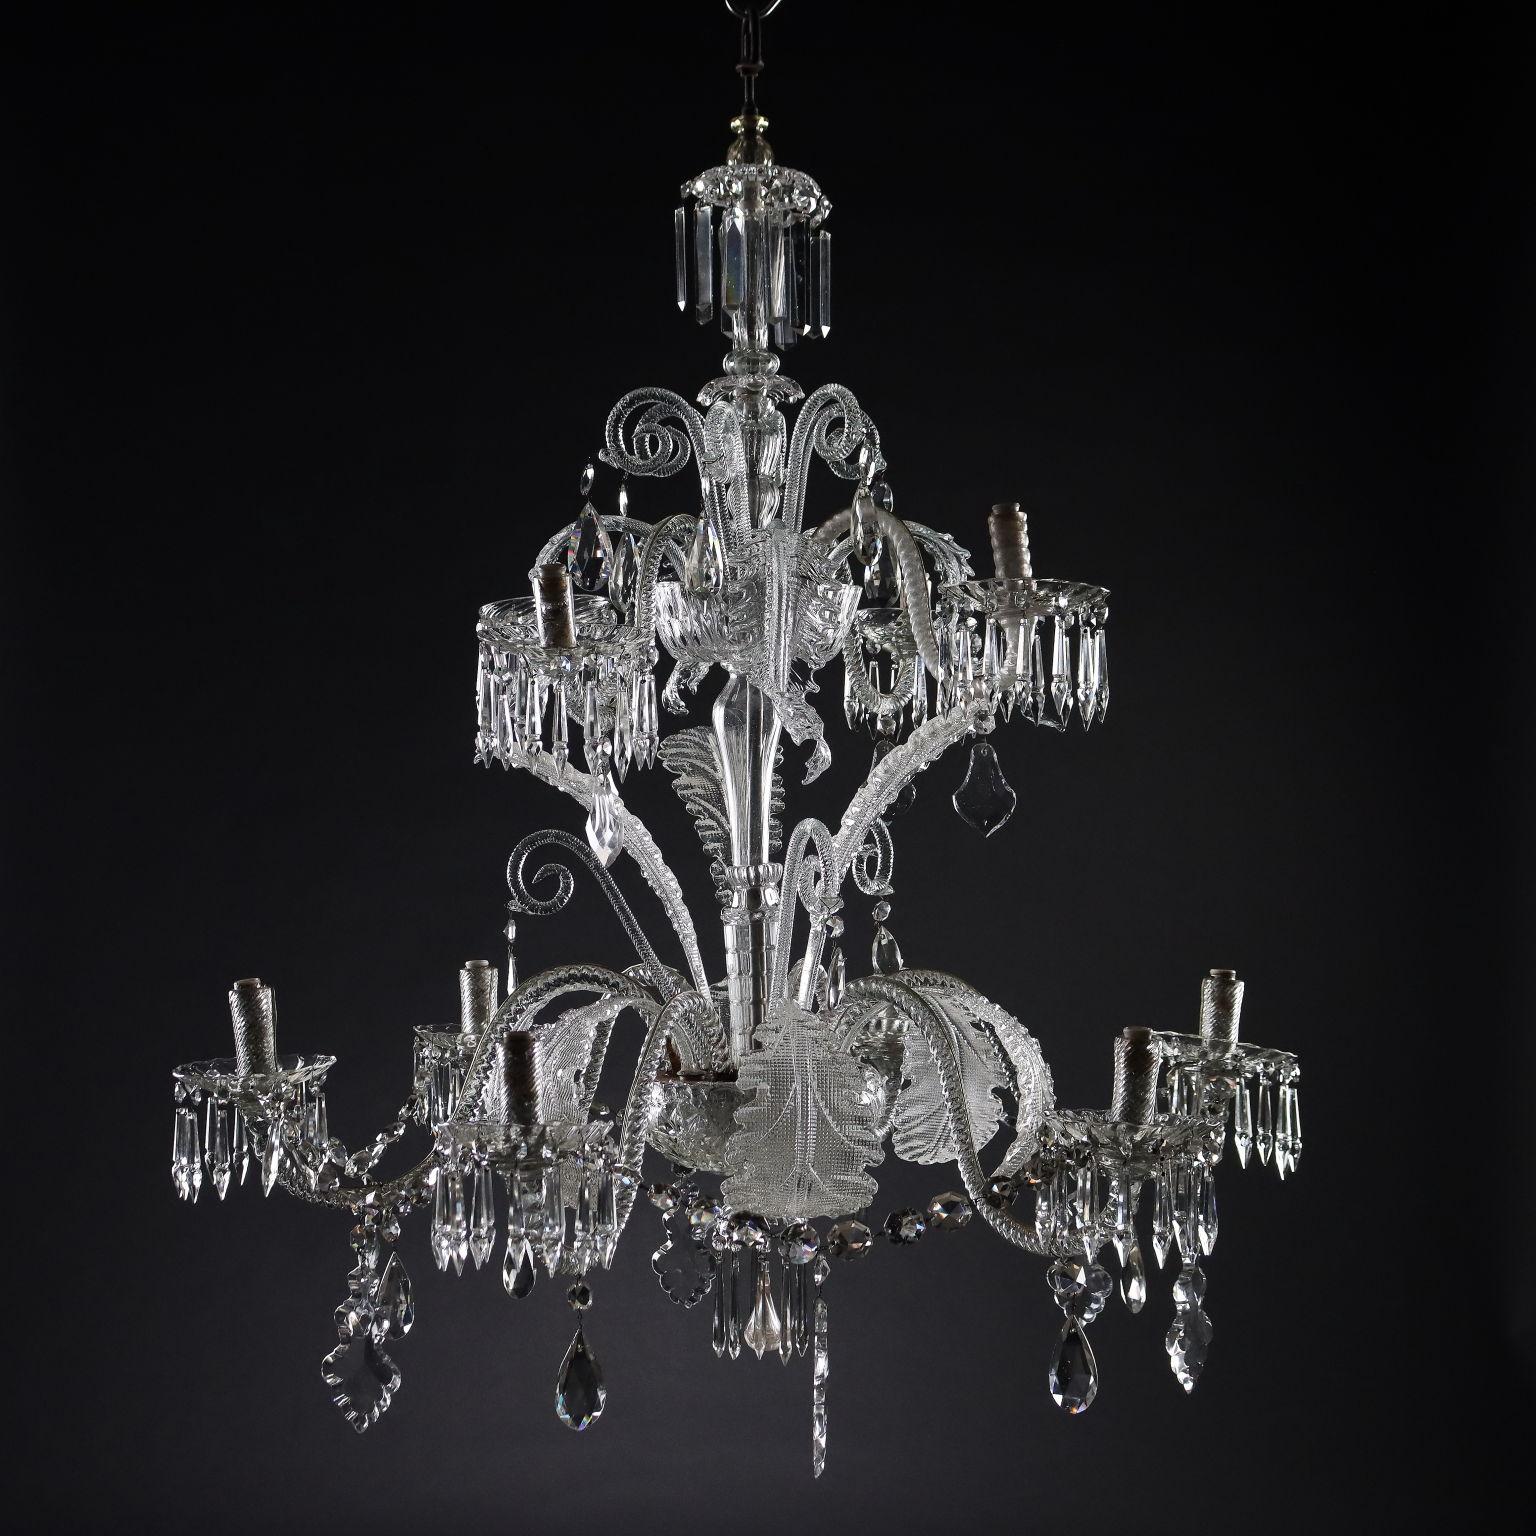 Murano chandelier in blown glass with 10 lights from the mid-19th century, completed with more recent parts. Glass necklaces and pendants. Breaks and failures.